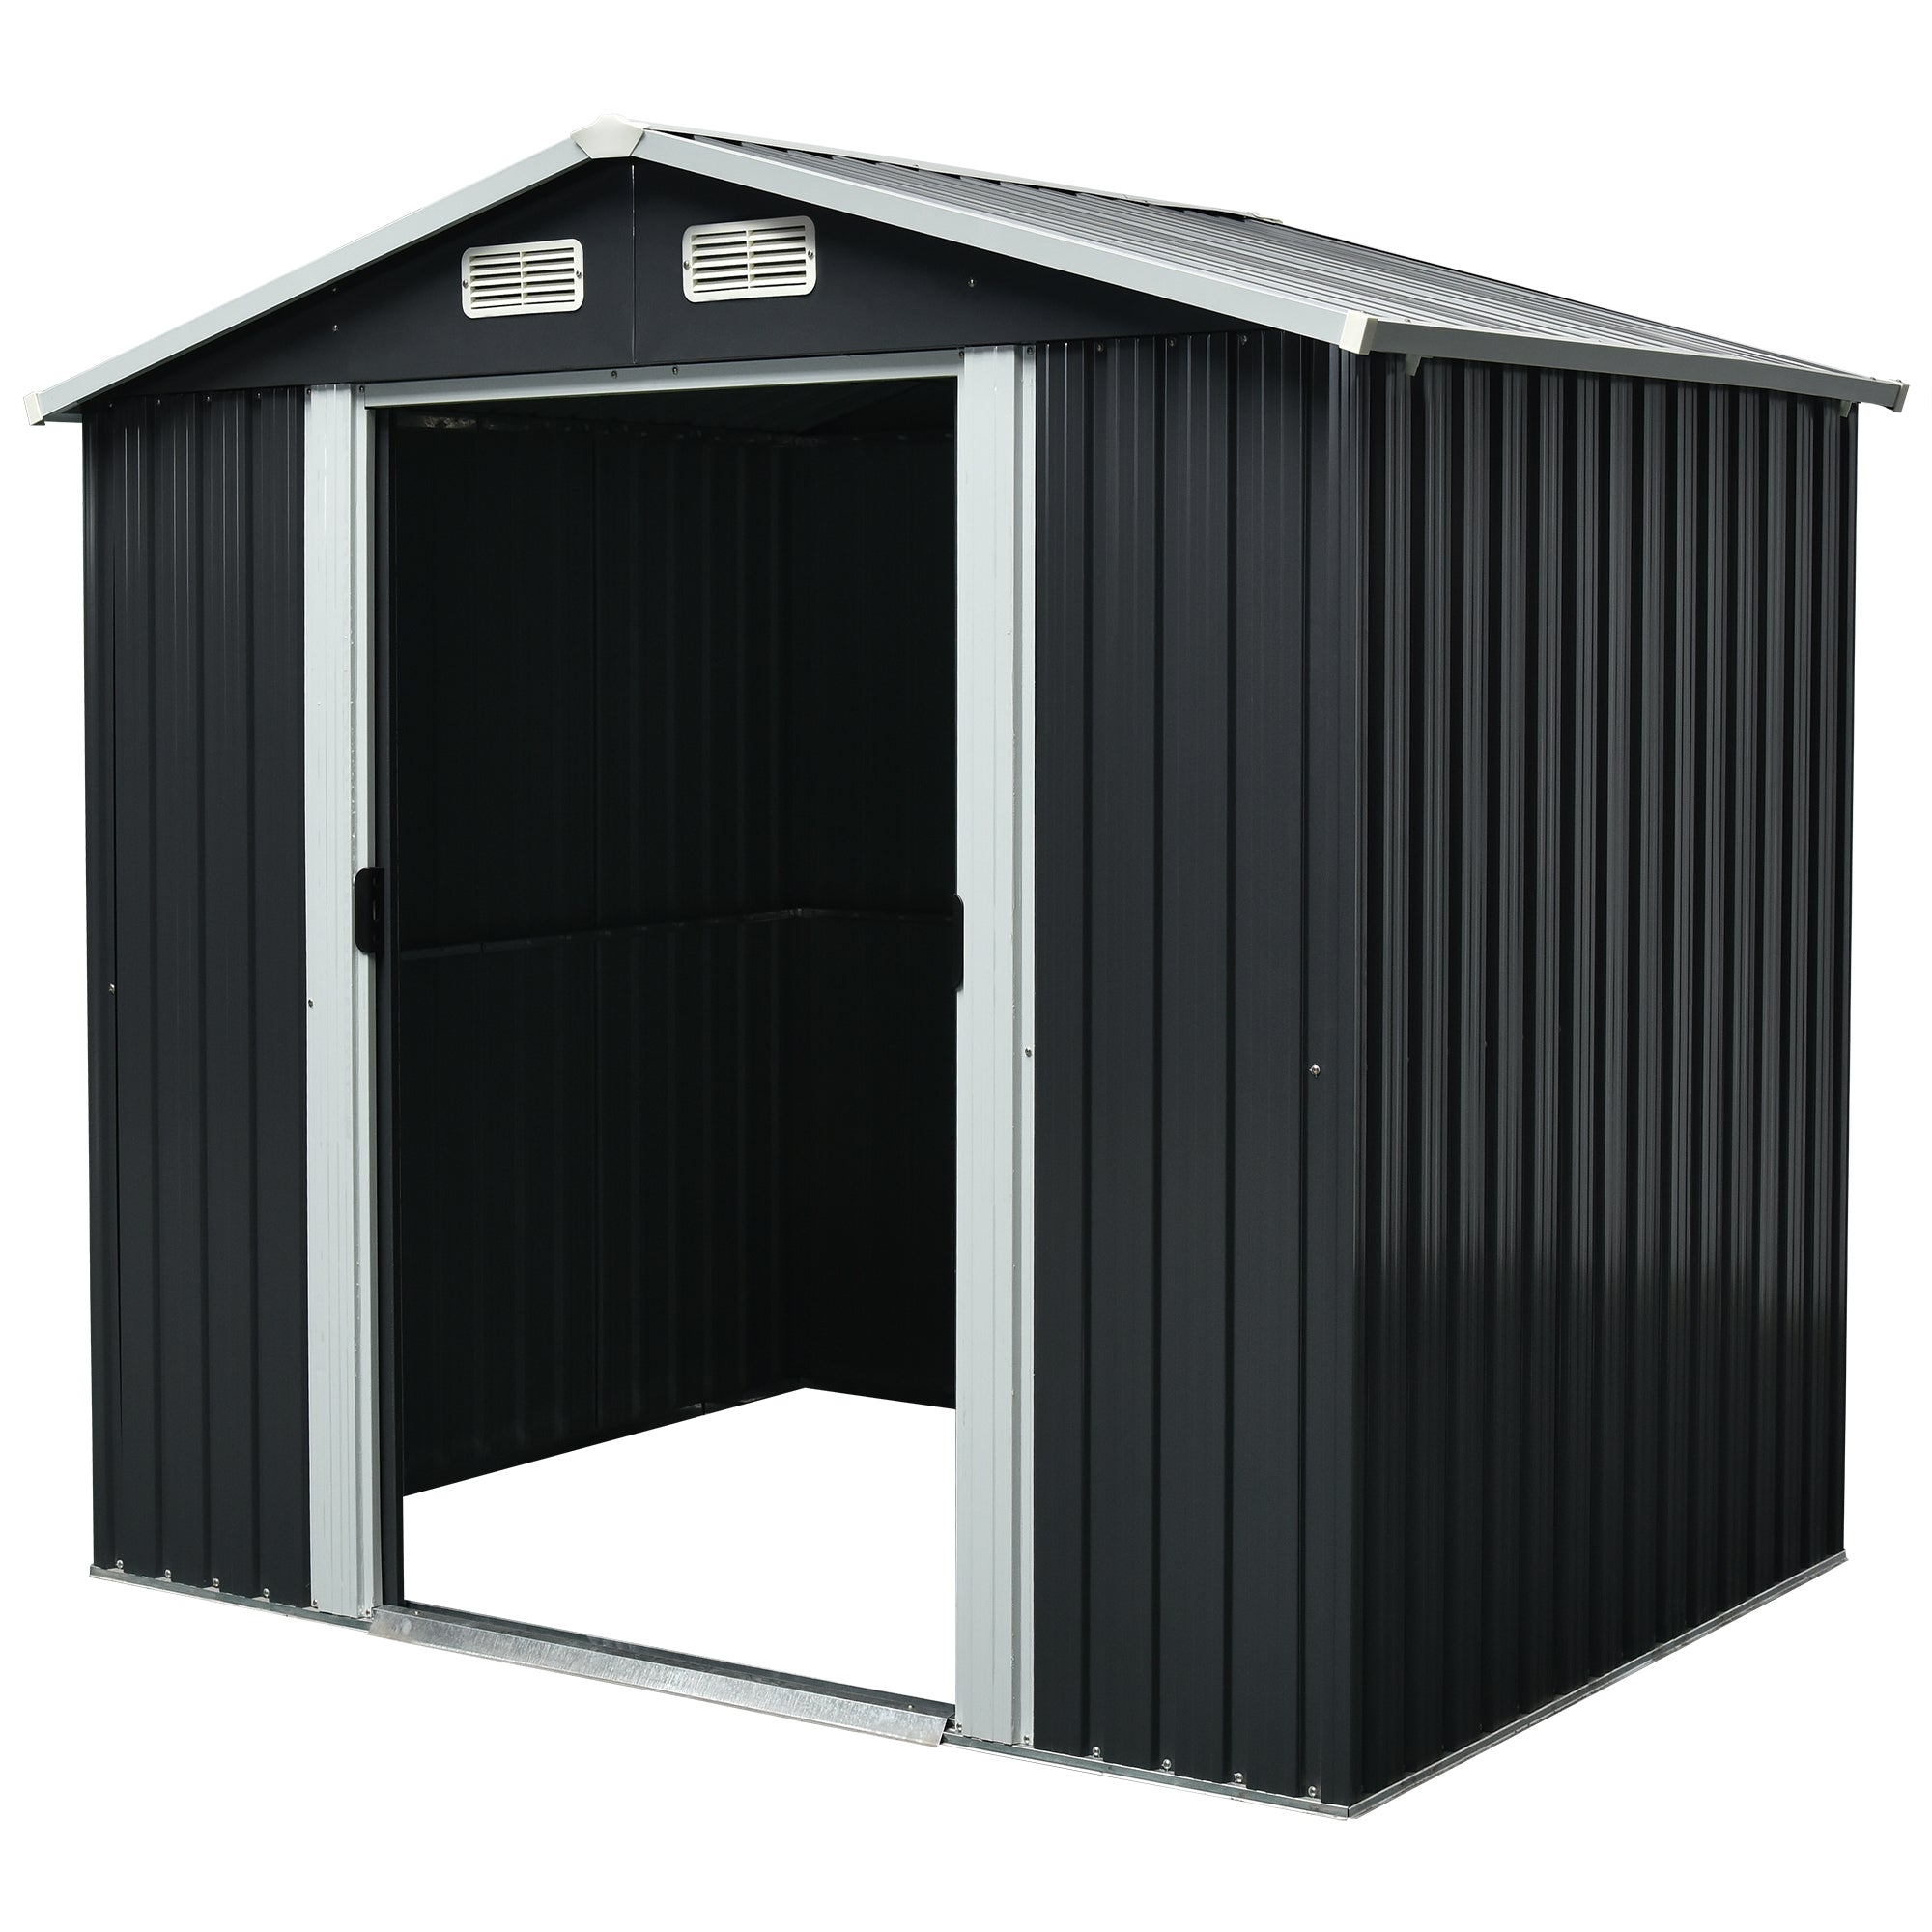 Patio Stash, 8' X 6' Galvanized Steel Garden Shed with 4 Vents & Double Lockable Sliding Door, Utility Tool Shed Storage House for Backyard, Patio, Lawn